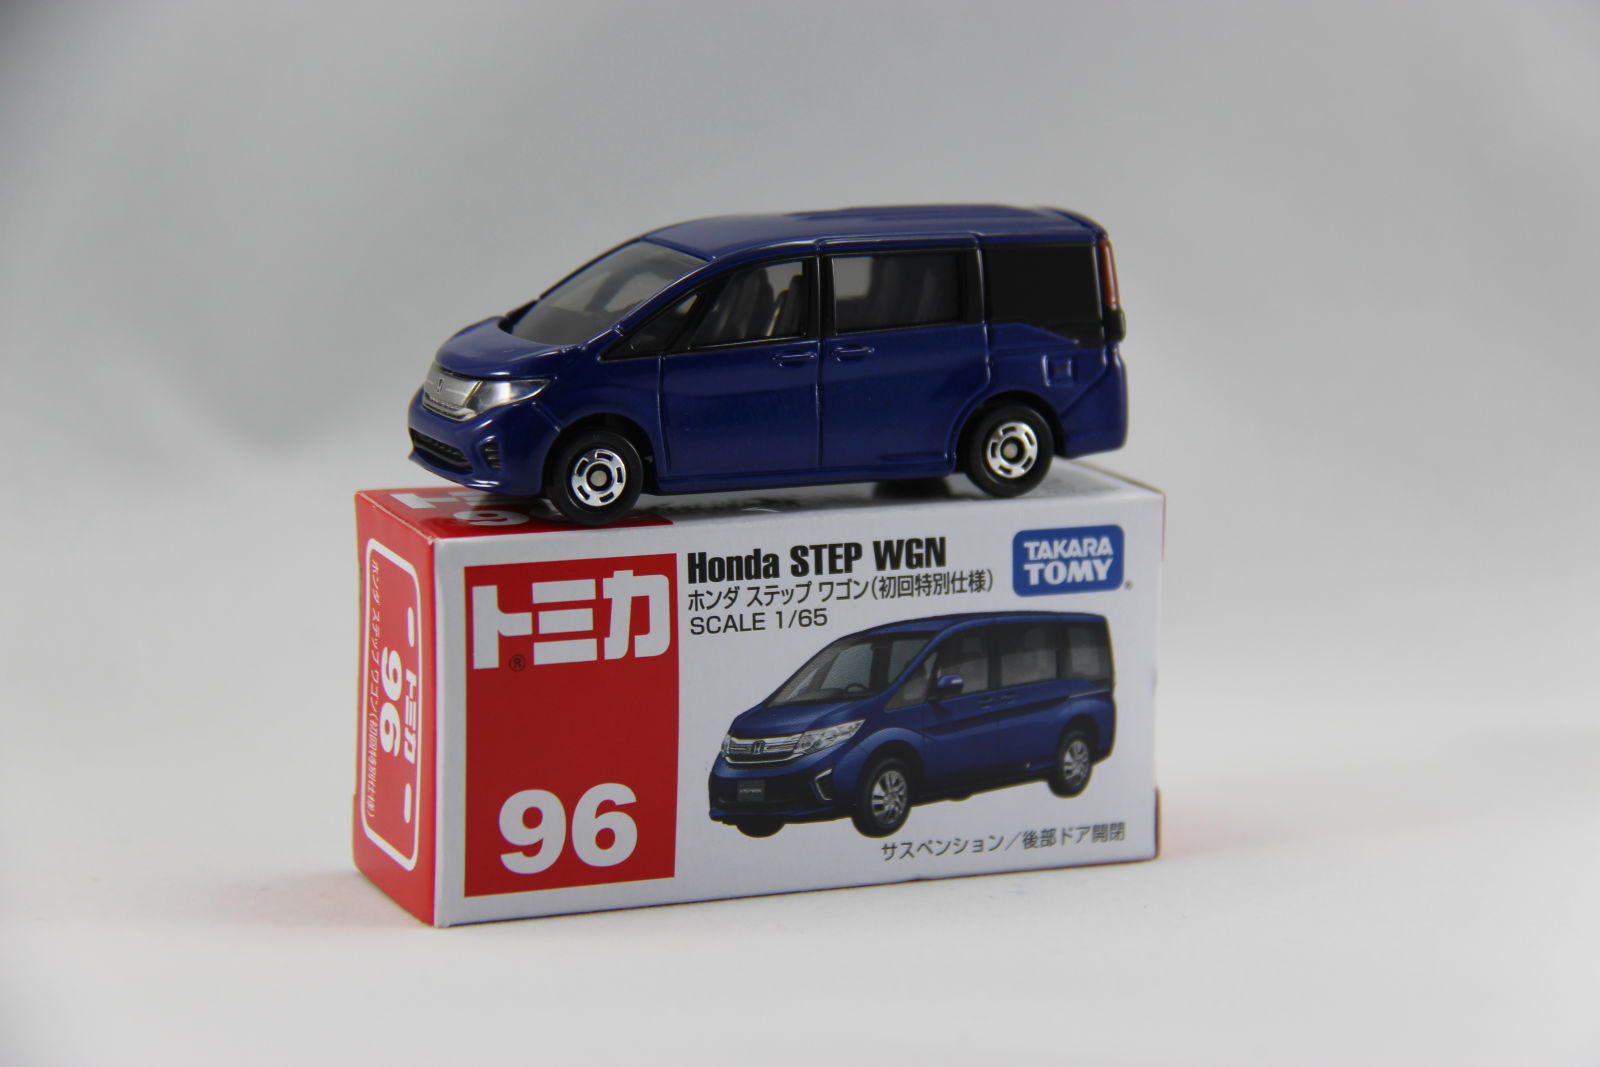 This Stepwgn is all my doing—only I’m weird enough to request a miniature minivan from thousands of miles across the Pacific!